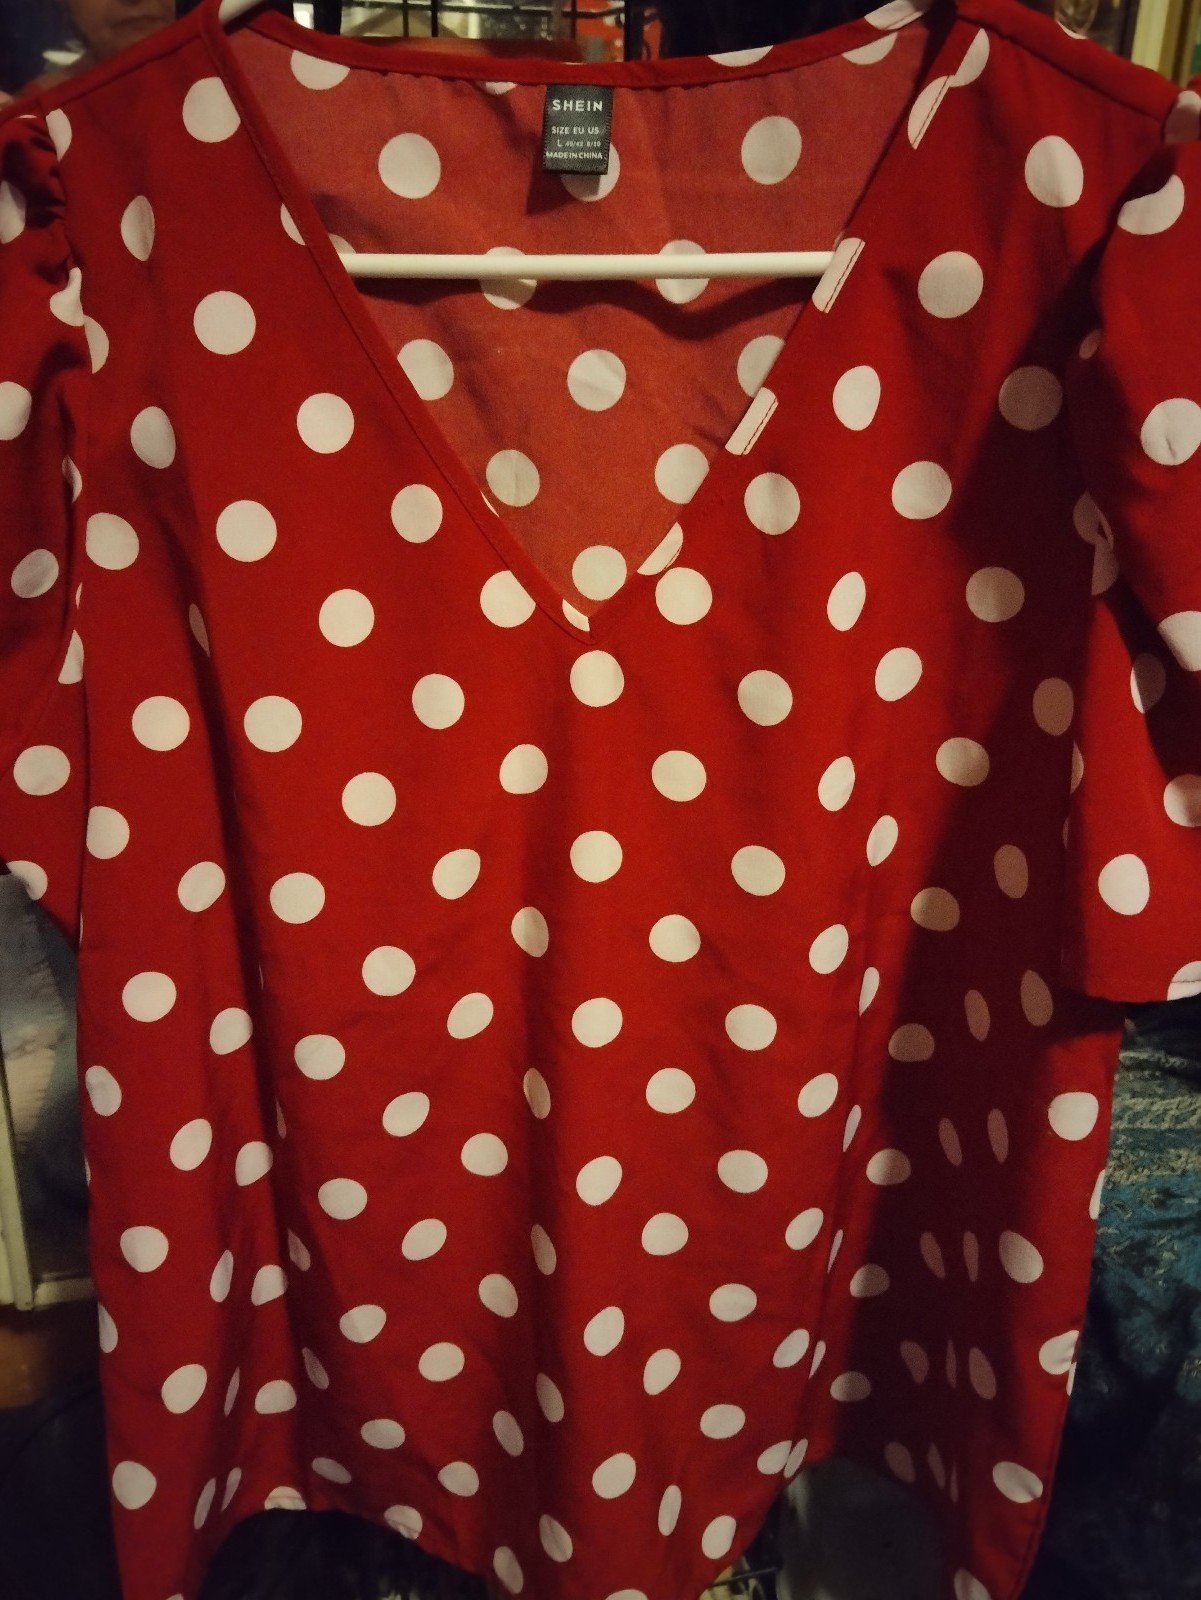 save up to 70% Shein Polka Dot Red short sleeve Top jgdeFR7AW well sale